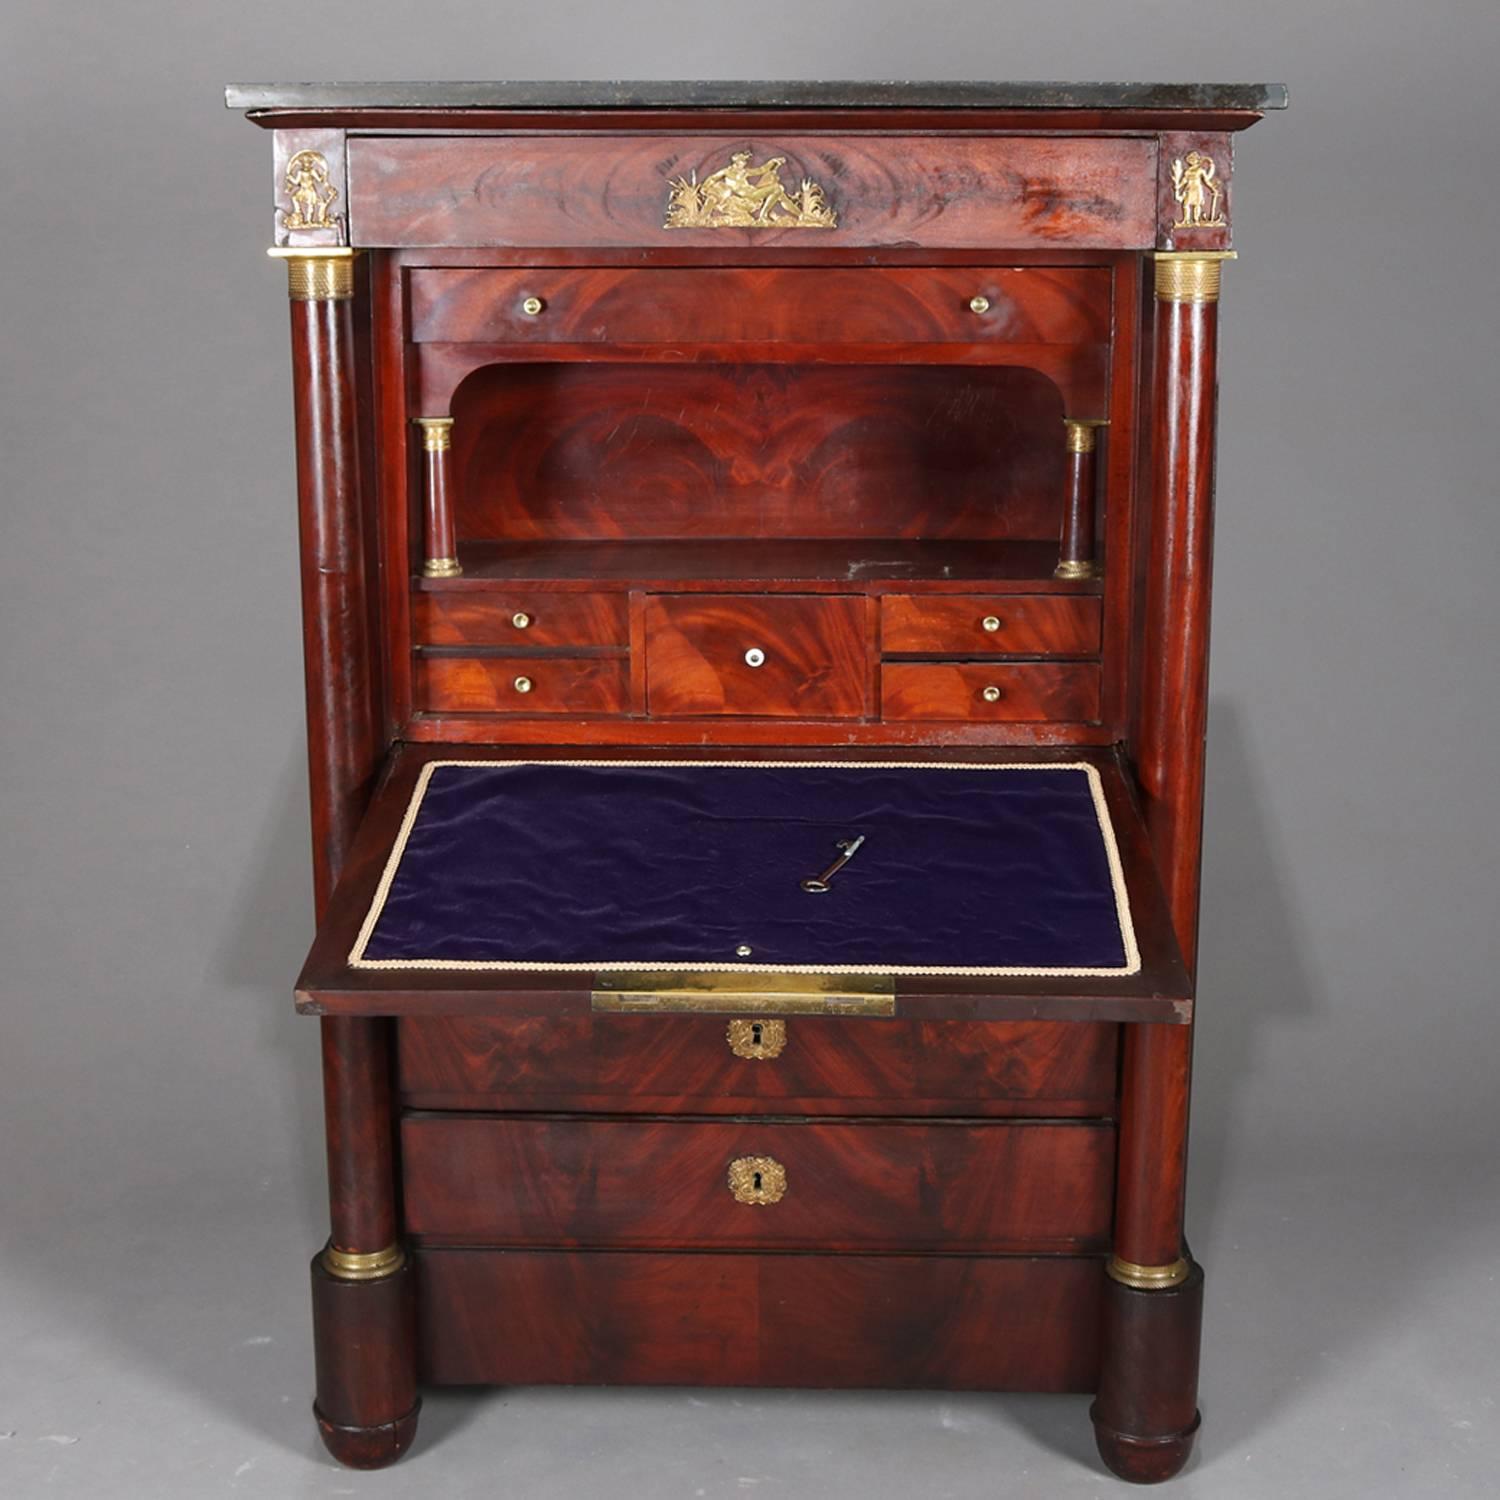 19th Century Antique Second Empire French Marble-Top Flame Mahogany and Ormolu Abattant